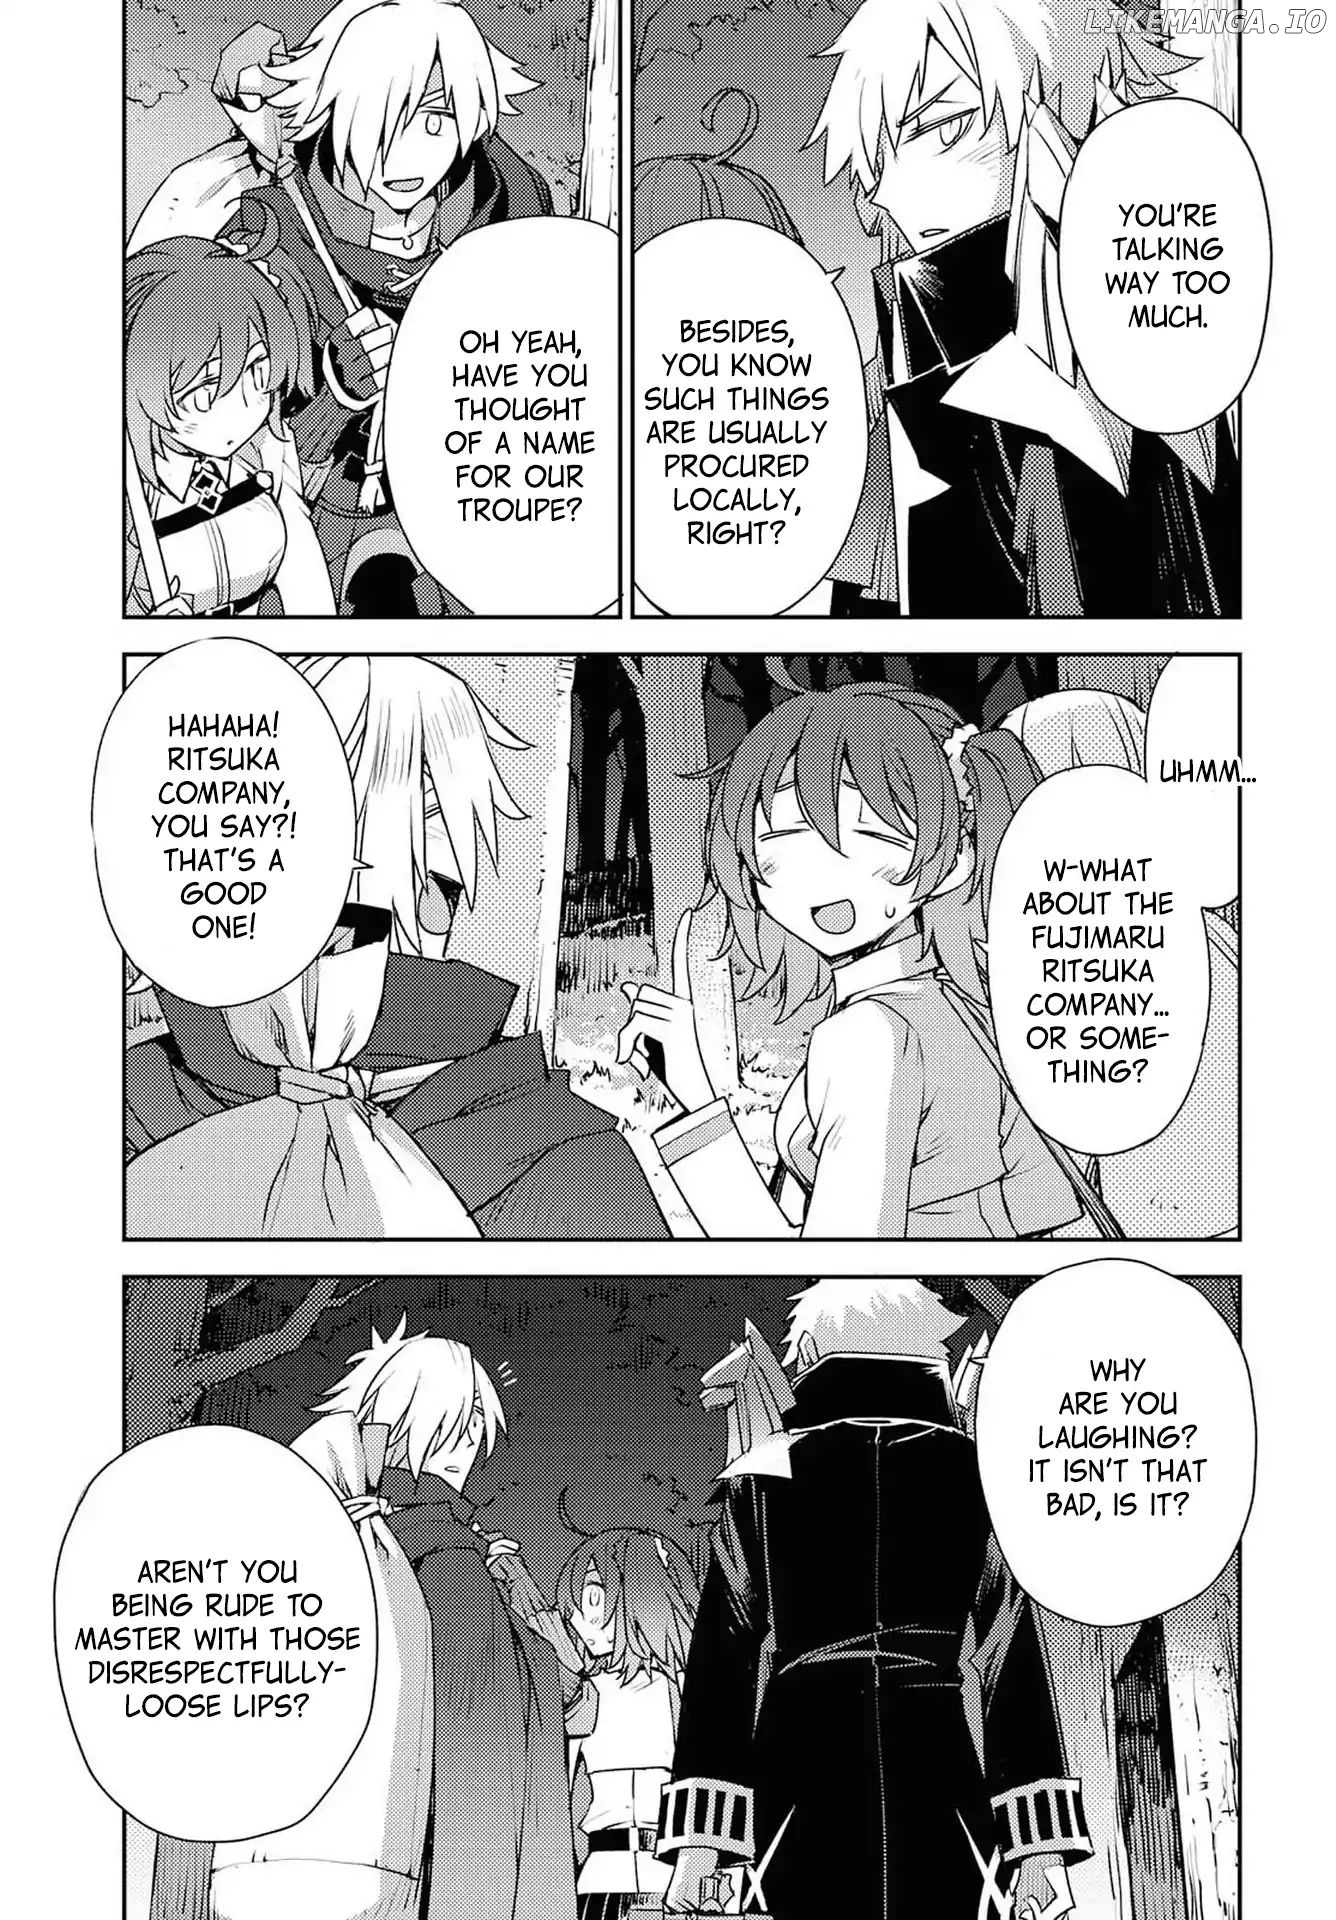 Fate/Grand Order: Epic of Remnant - Subspecies Singularity IV: Taboo Advent Salem: Salem of Heresy chapter 2 - page 9